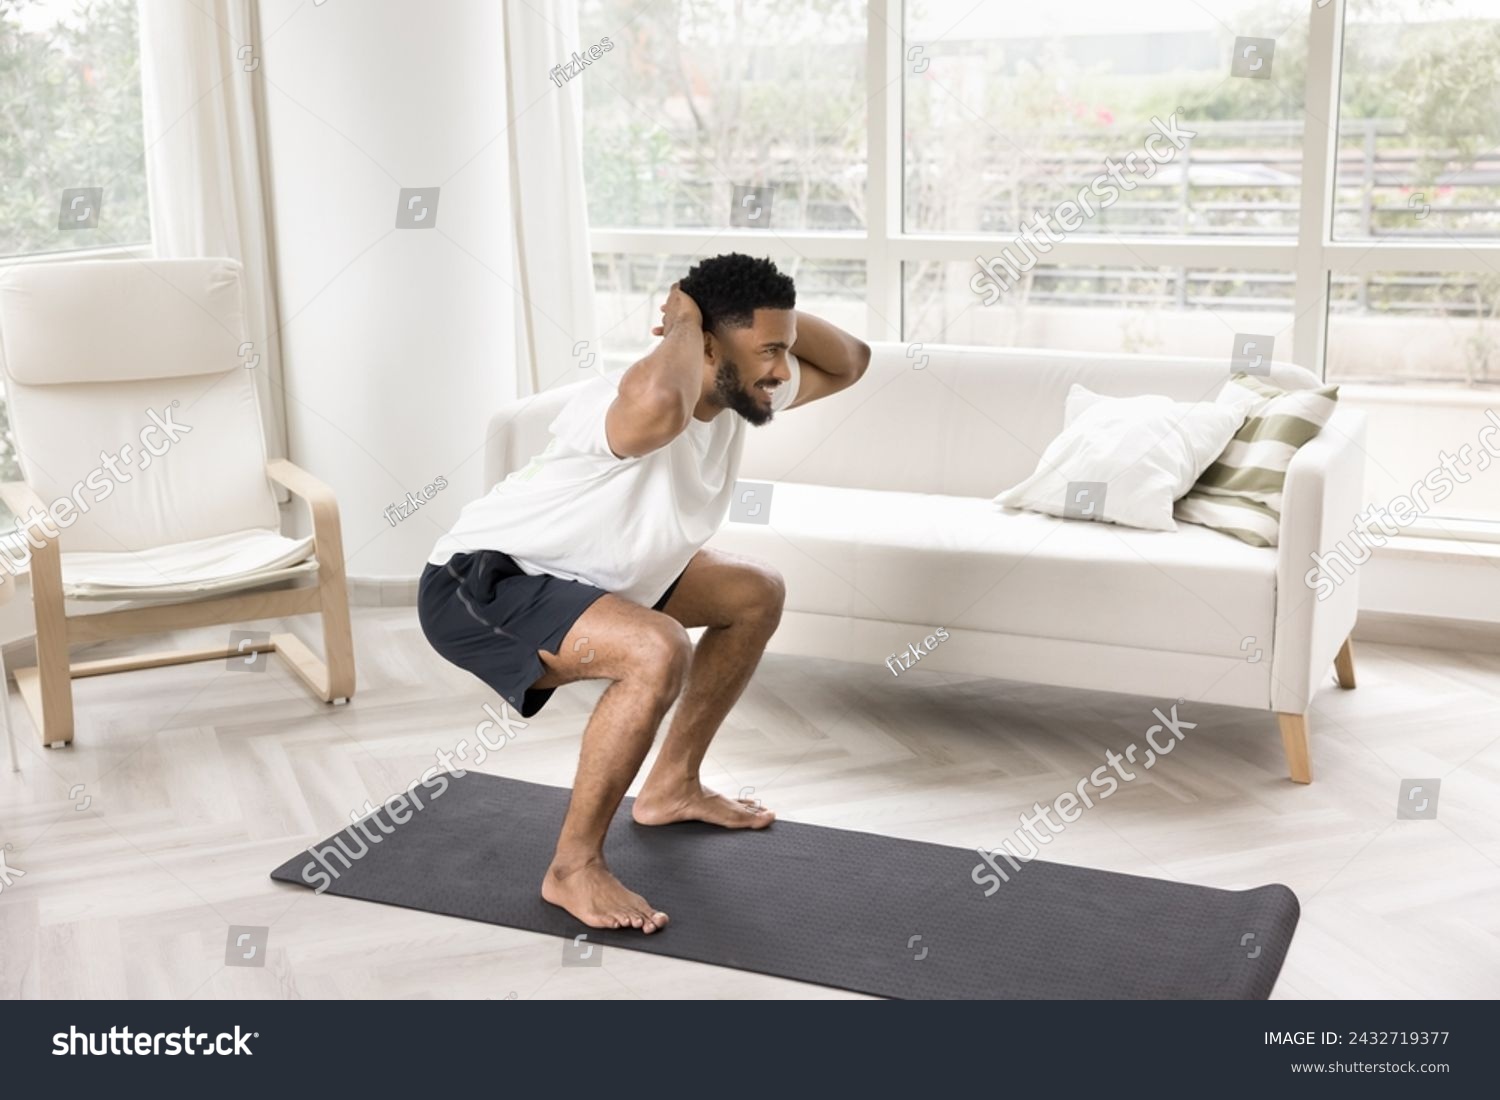 Happy sporty strong young African guy doing morning exercise on yoga mat at home, flexing hips, buttocks muscles in squats, looking away, smiling, enjoying active life style, keeping fit #2432719377